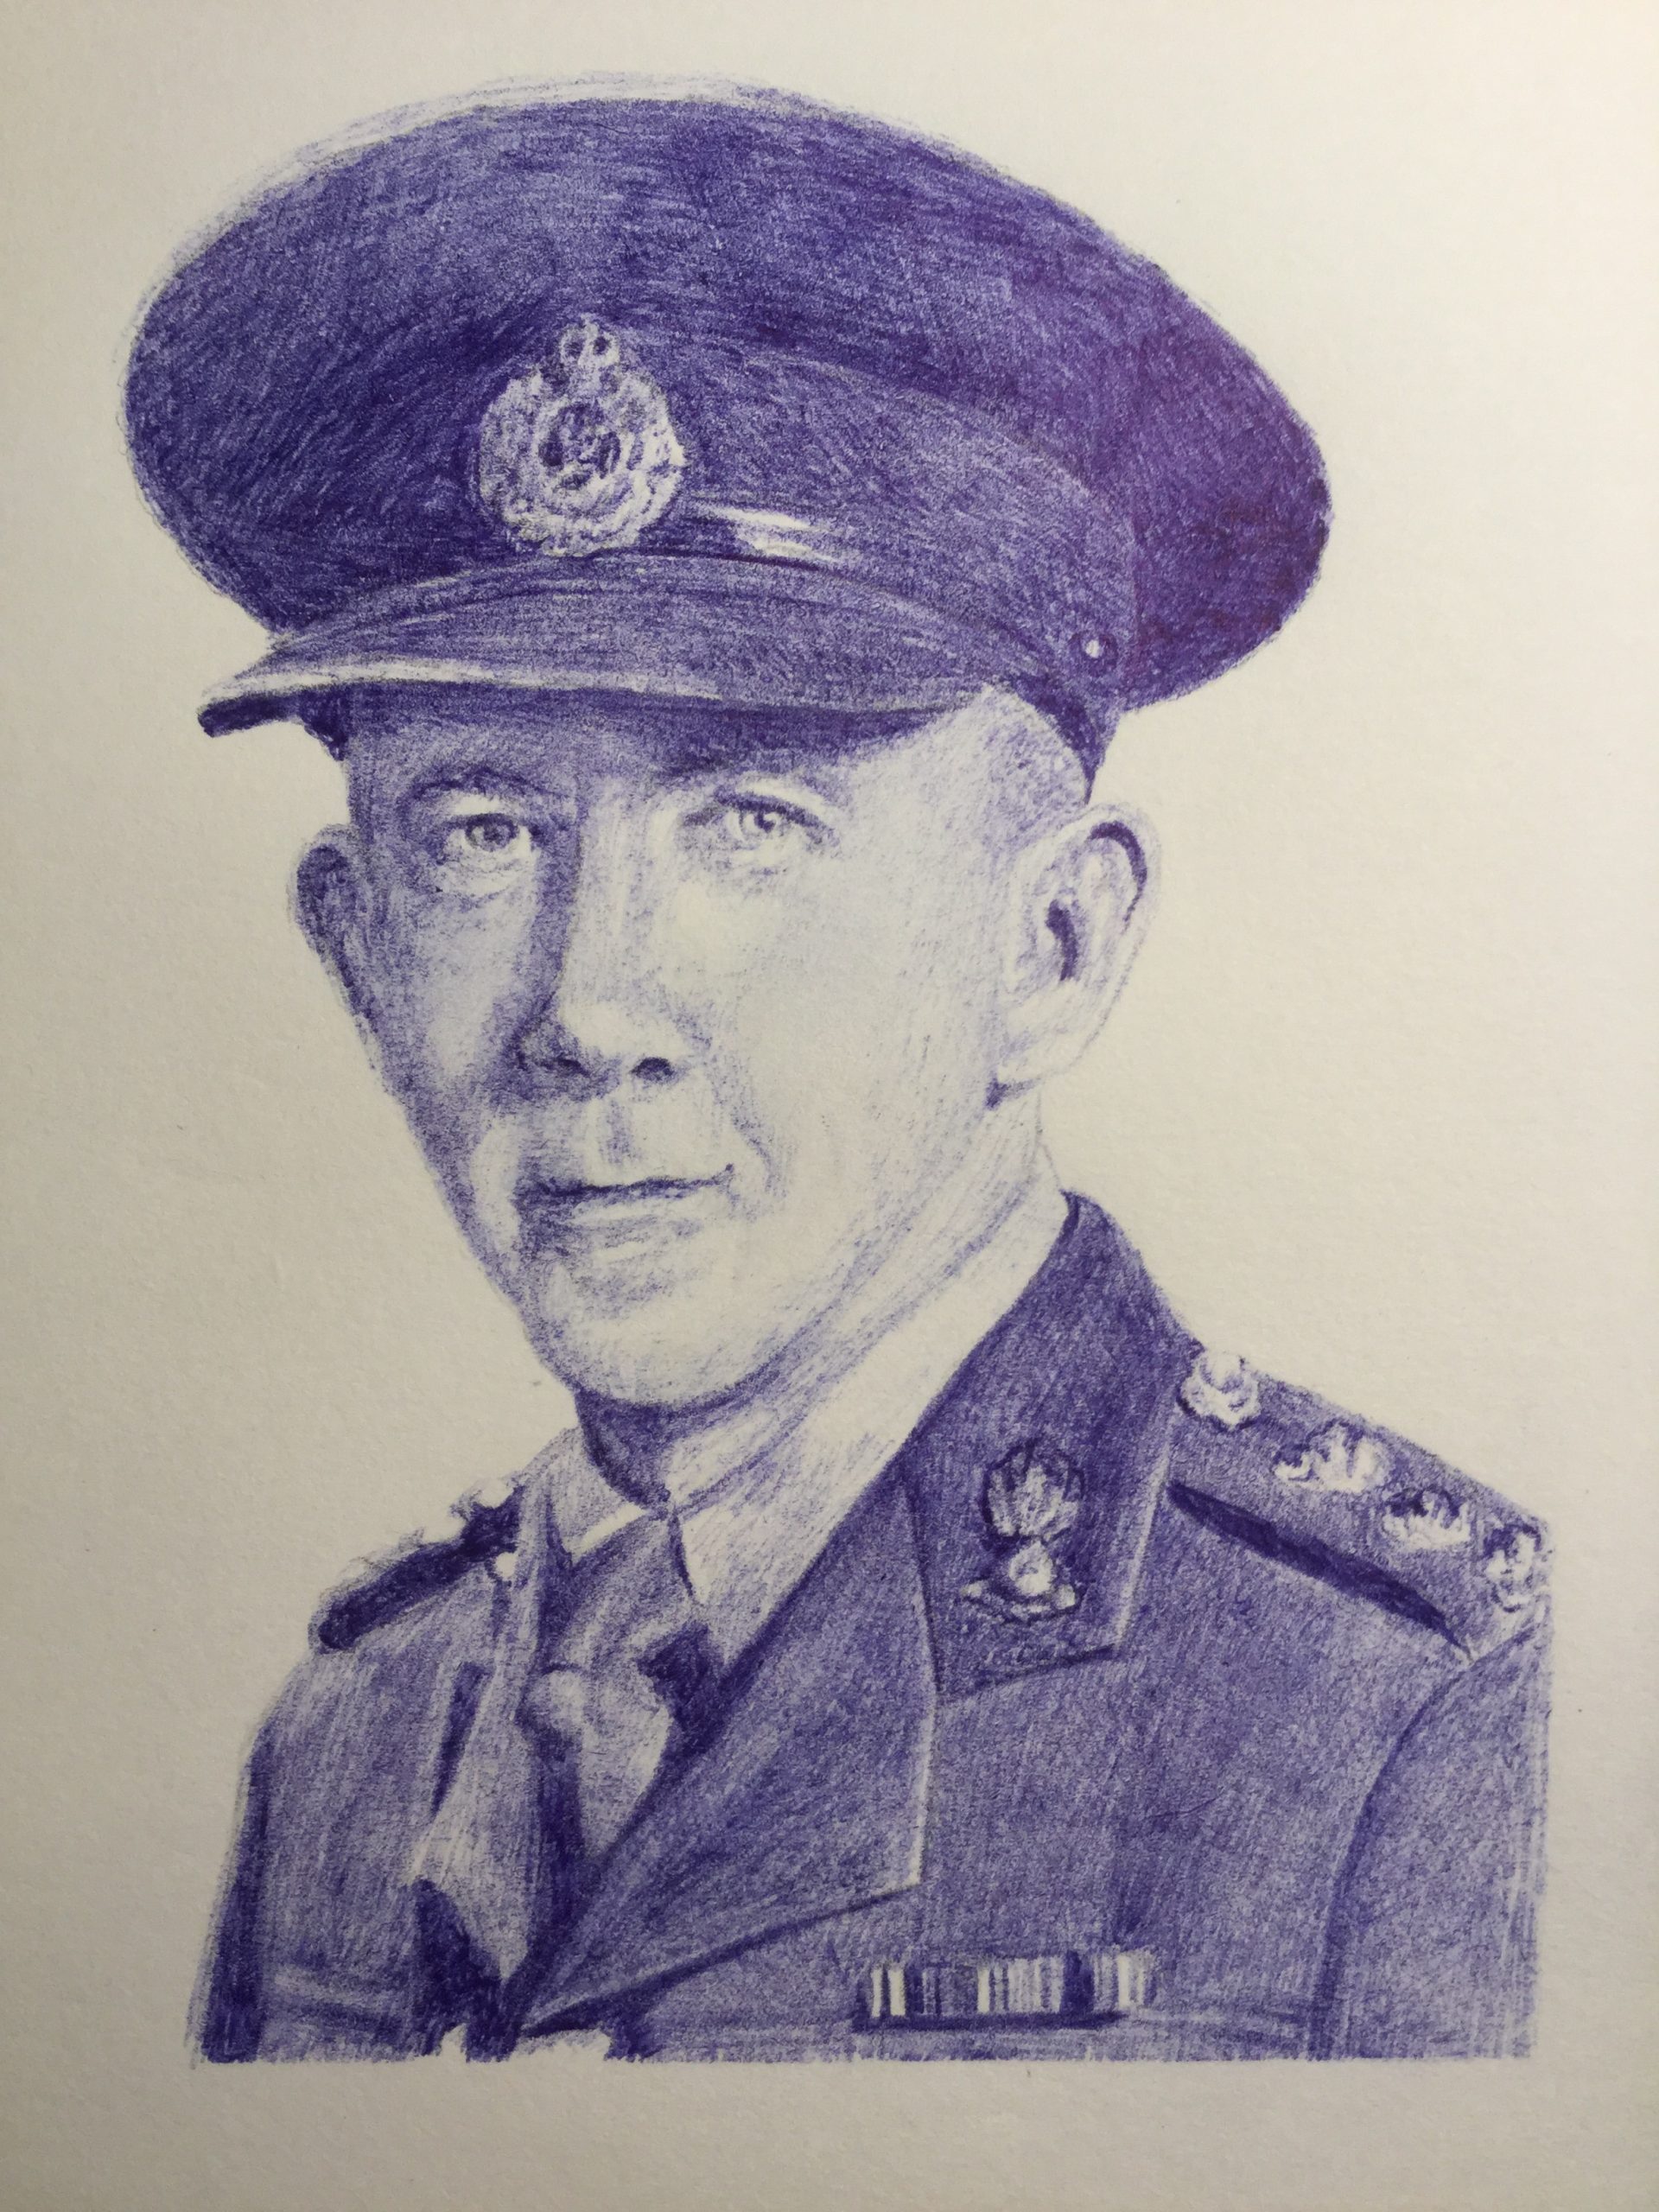 Ballpoint pen drawing of a Canadian soldier of the 2d world war.